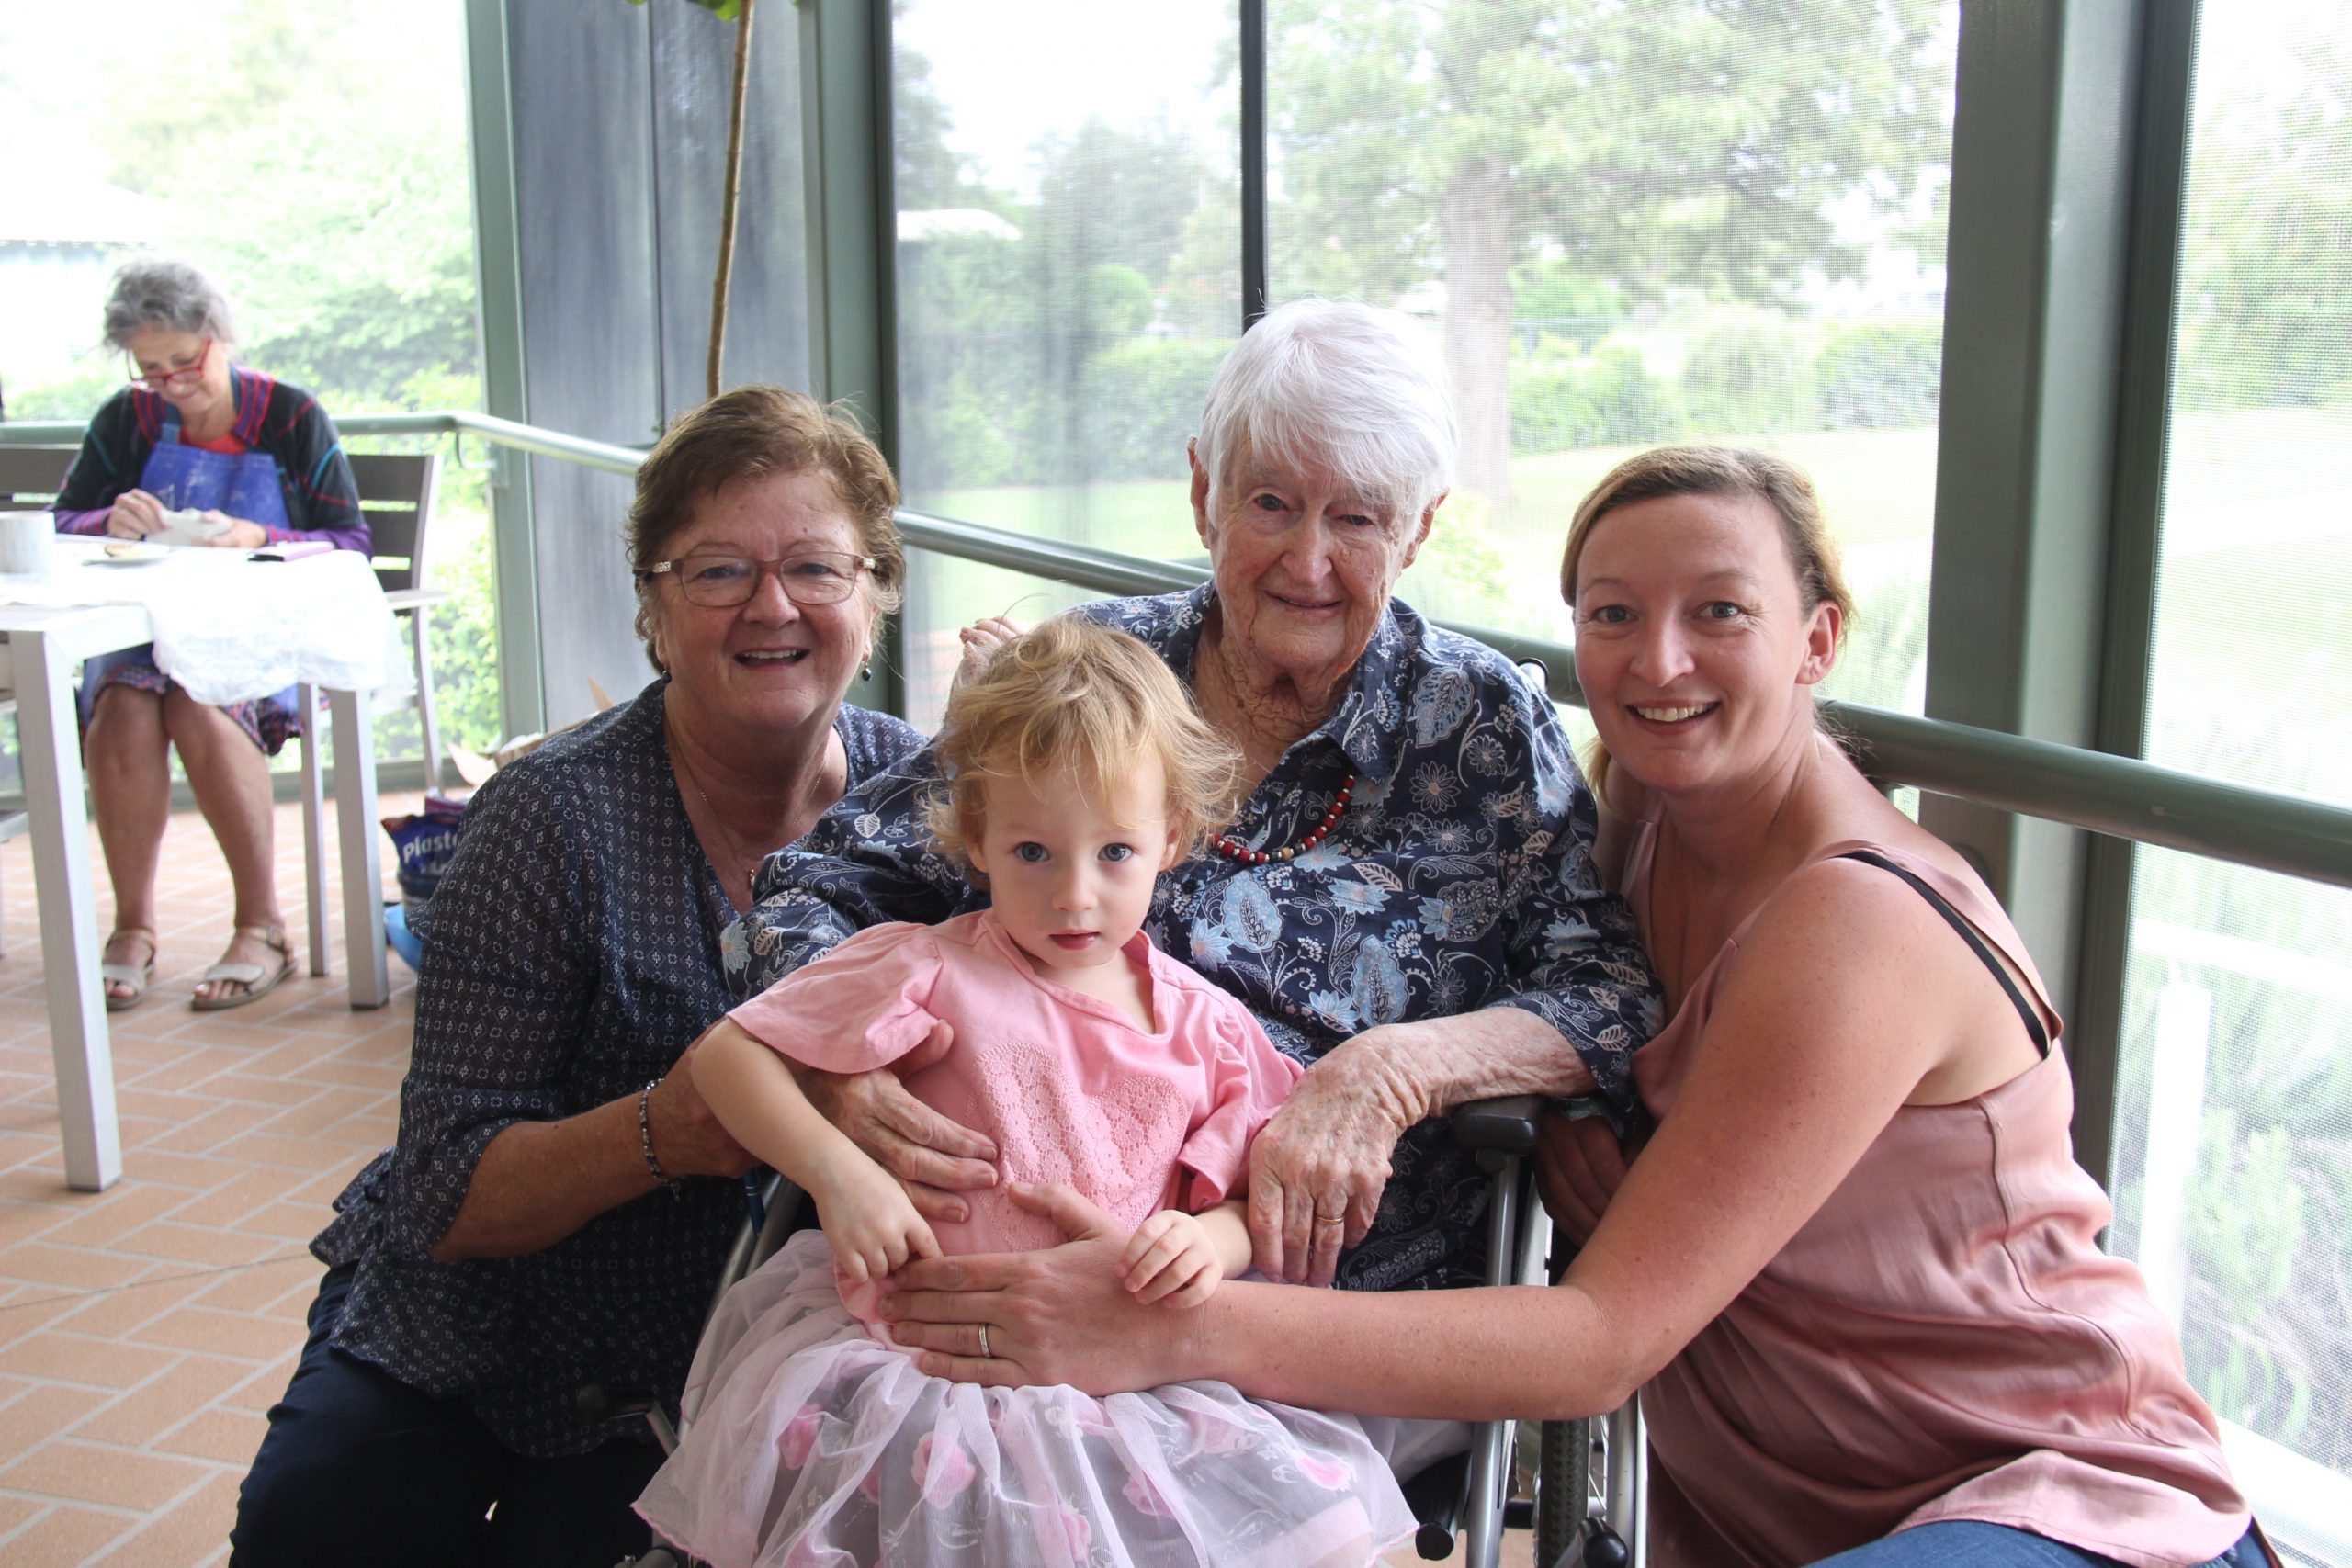 Mary Avery with her mum Una Galvin who is holding her great-granddaughter Olivia Avery and Olivia’s mum Amanda at Whiddon’s Wee Waa aged care residence for the ‘Holding the past, Handling the future’ art project. These photos were taken before the tightening of COVID-19 restrictions.